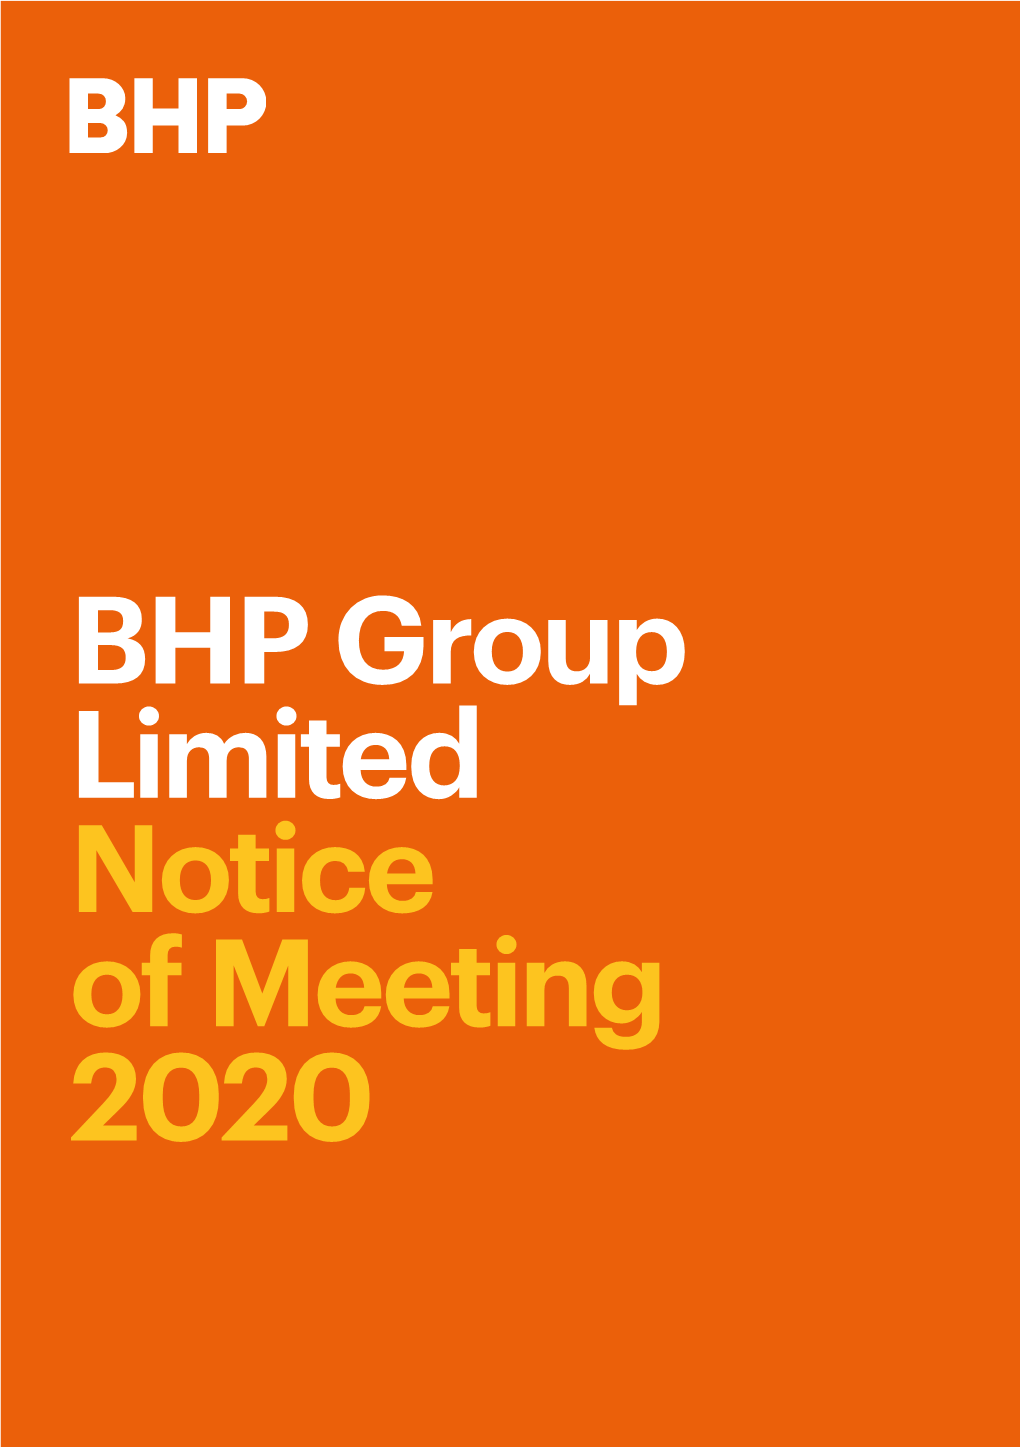 BHP Group Limited Notice of Meeting 2020 Our Charter